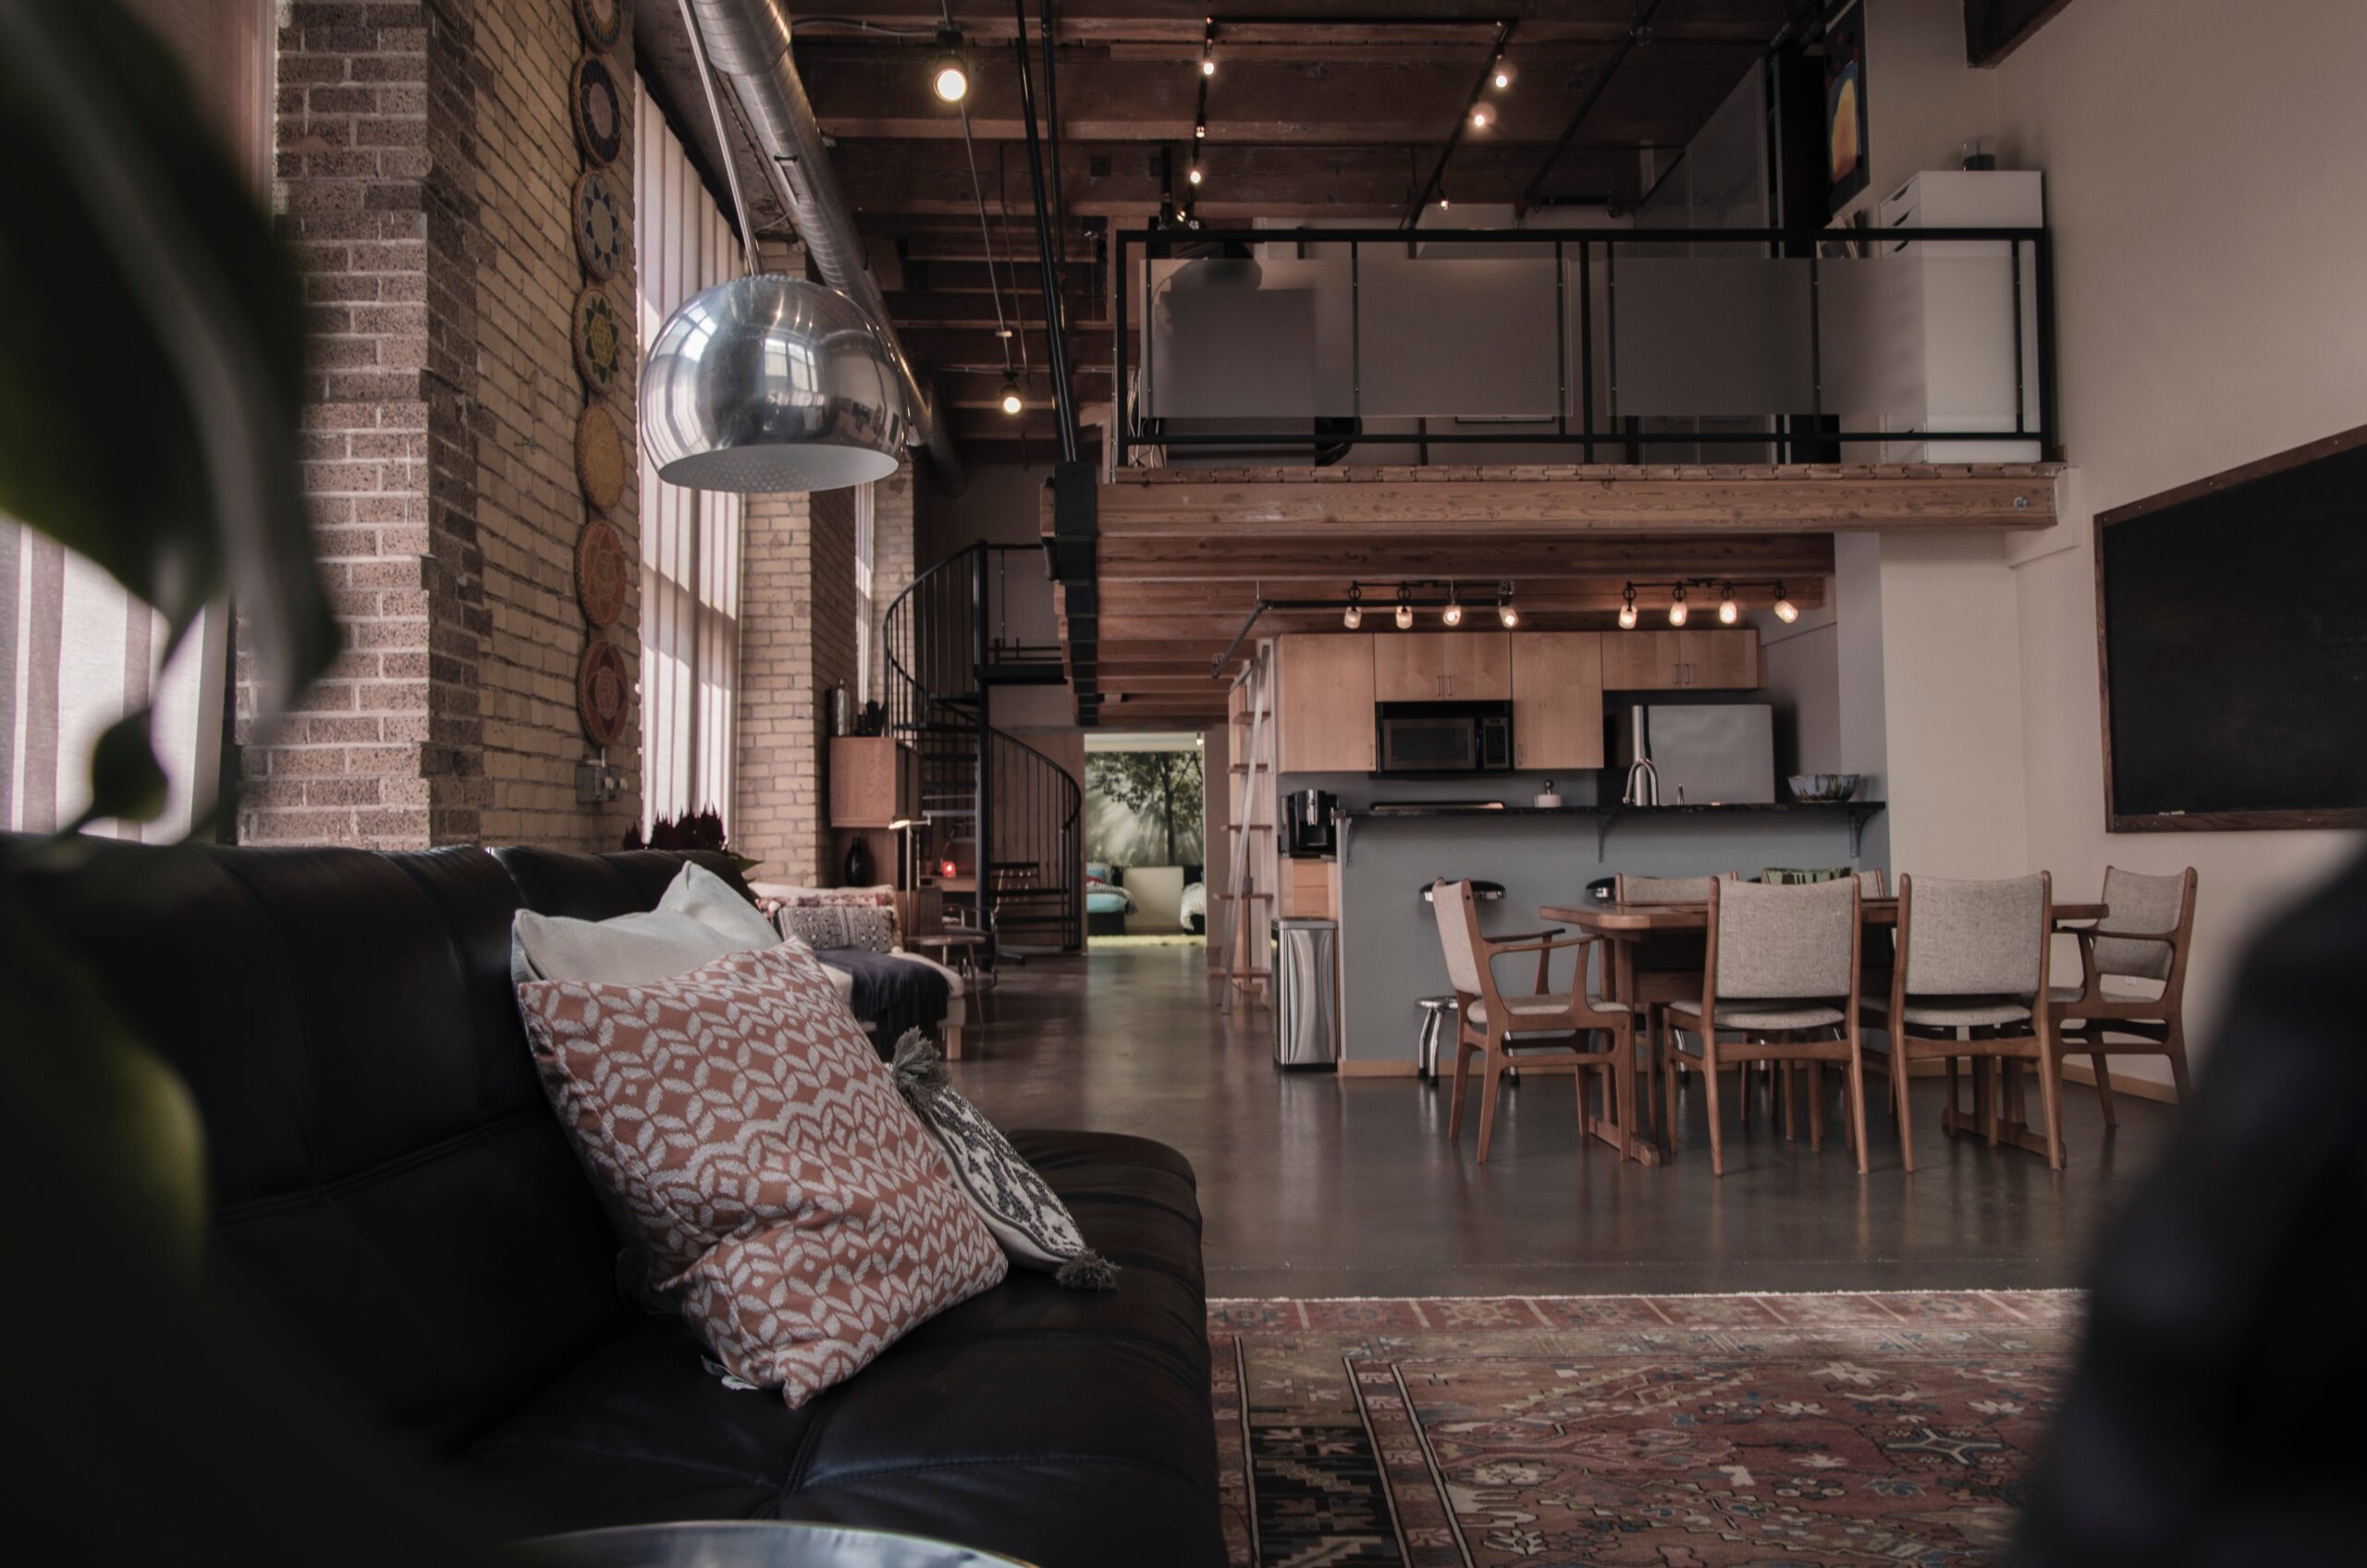 Dark and moody loft-style home interior, featuring industrial design elements with sophisticated, atmospheric lighting, creating an intimate urban living space in Calgary.